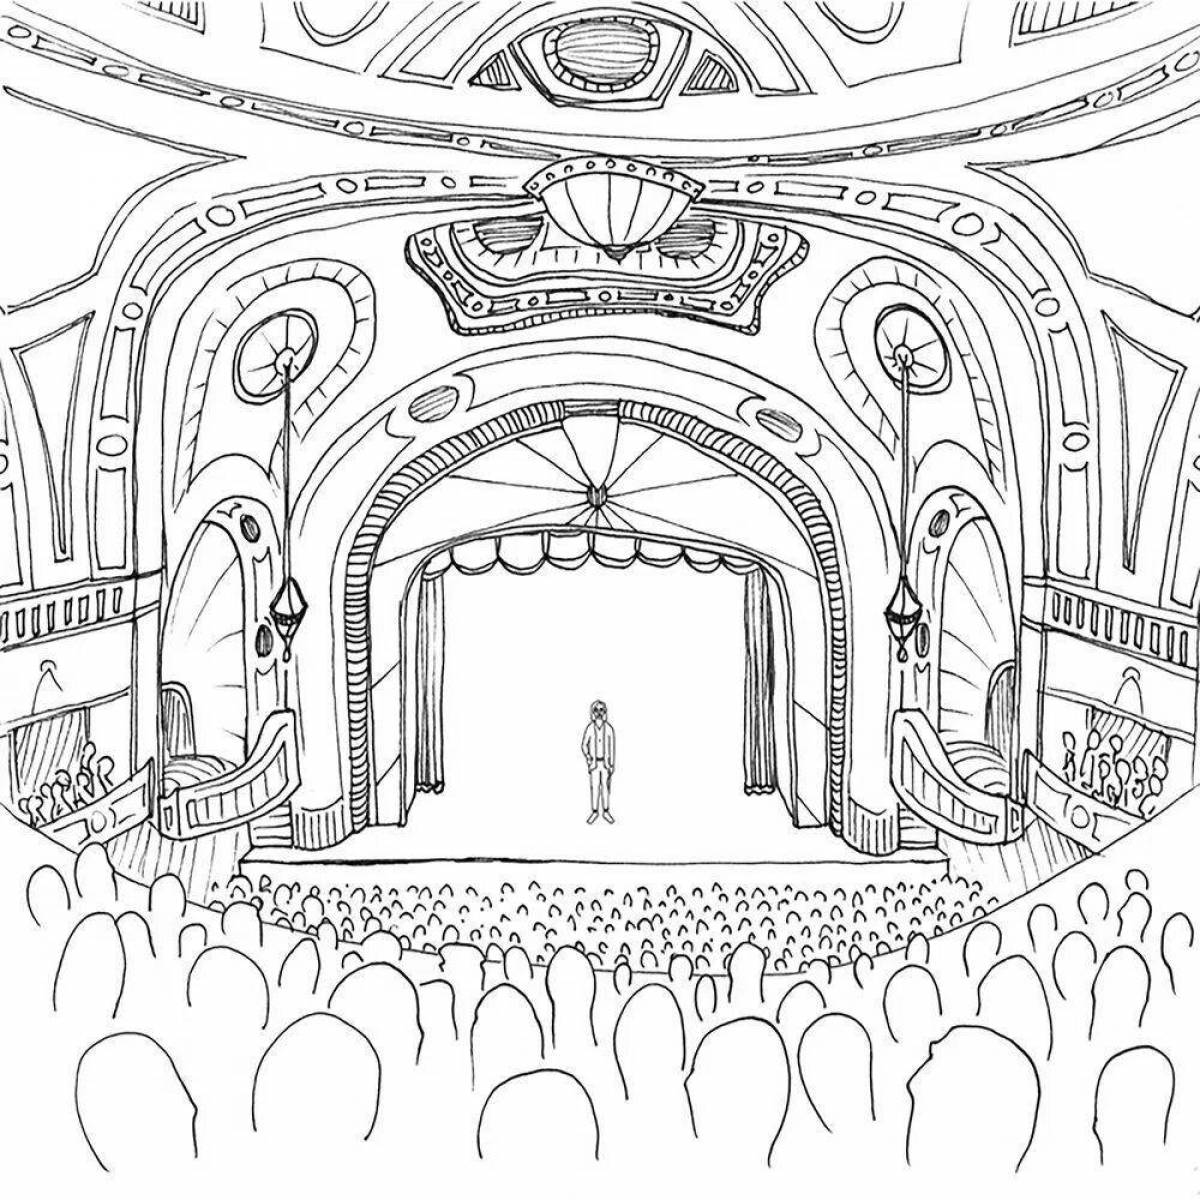 Playful theater performer coloring page